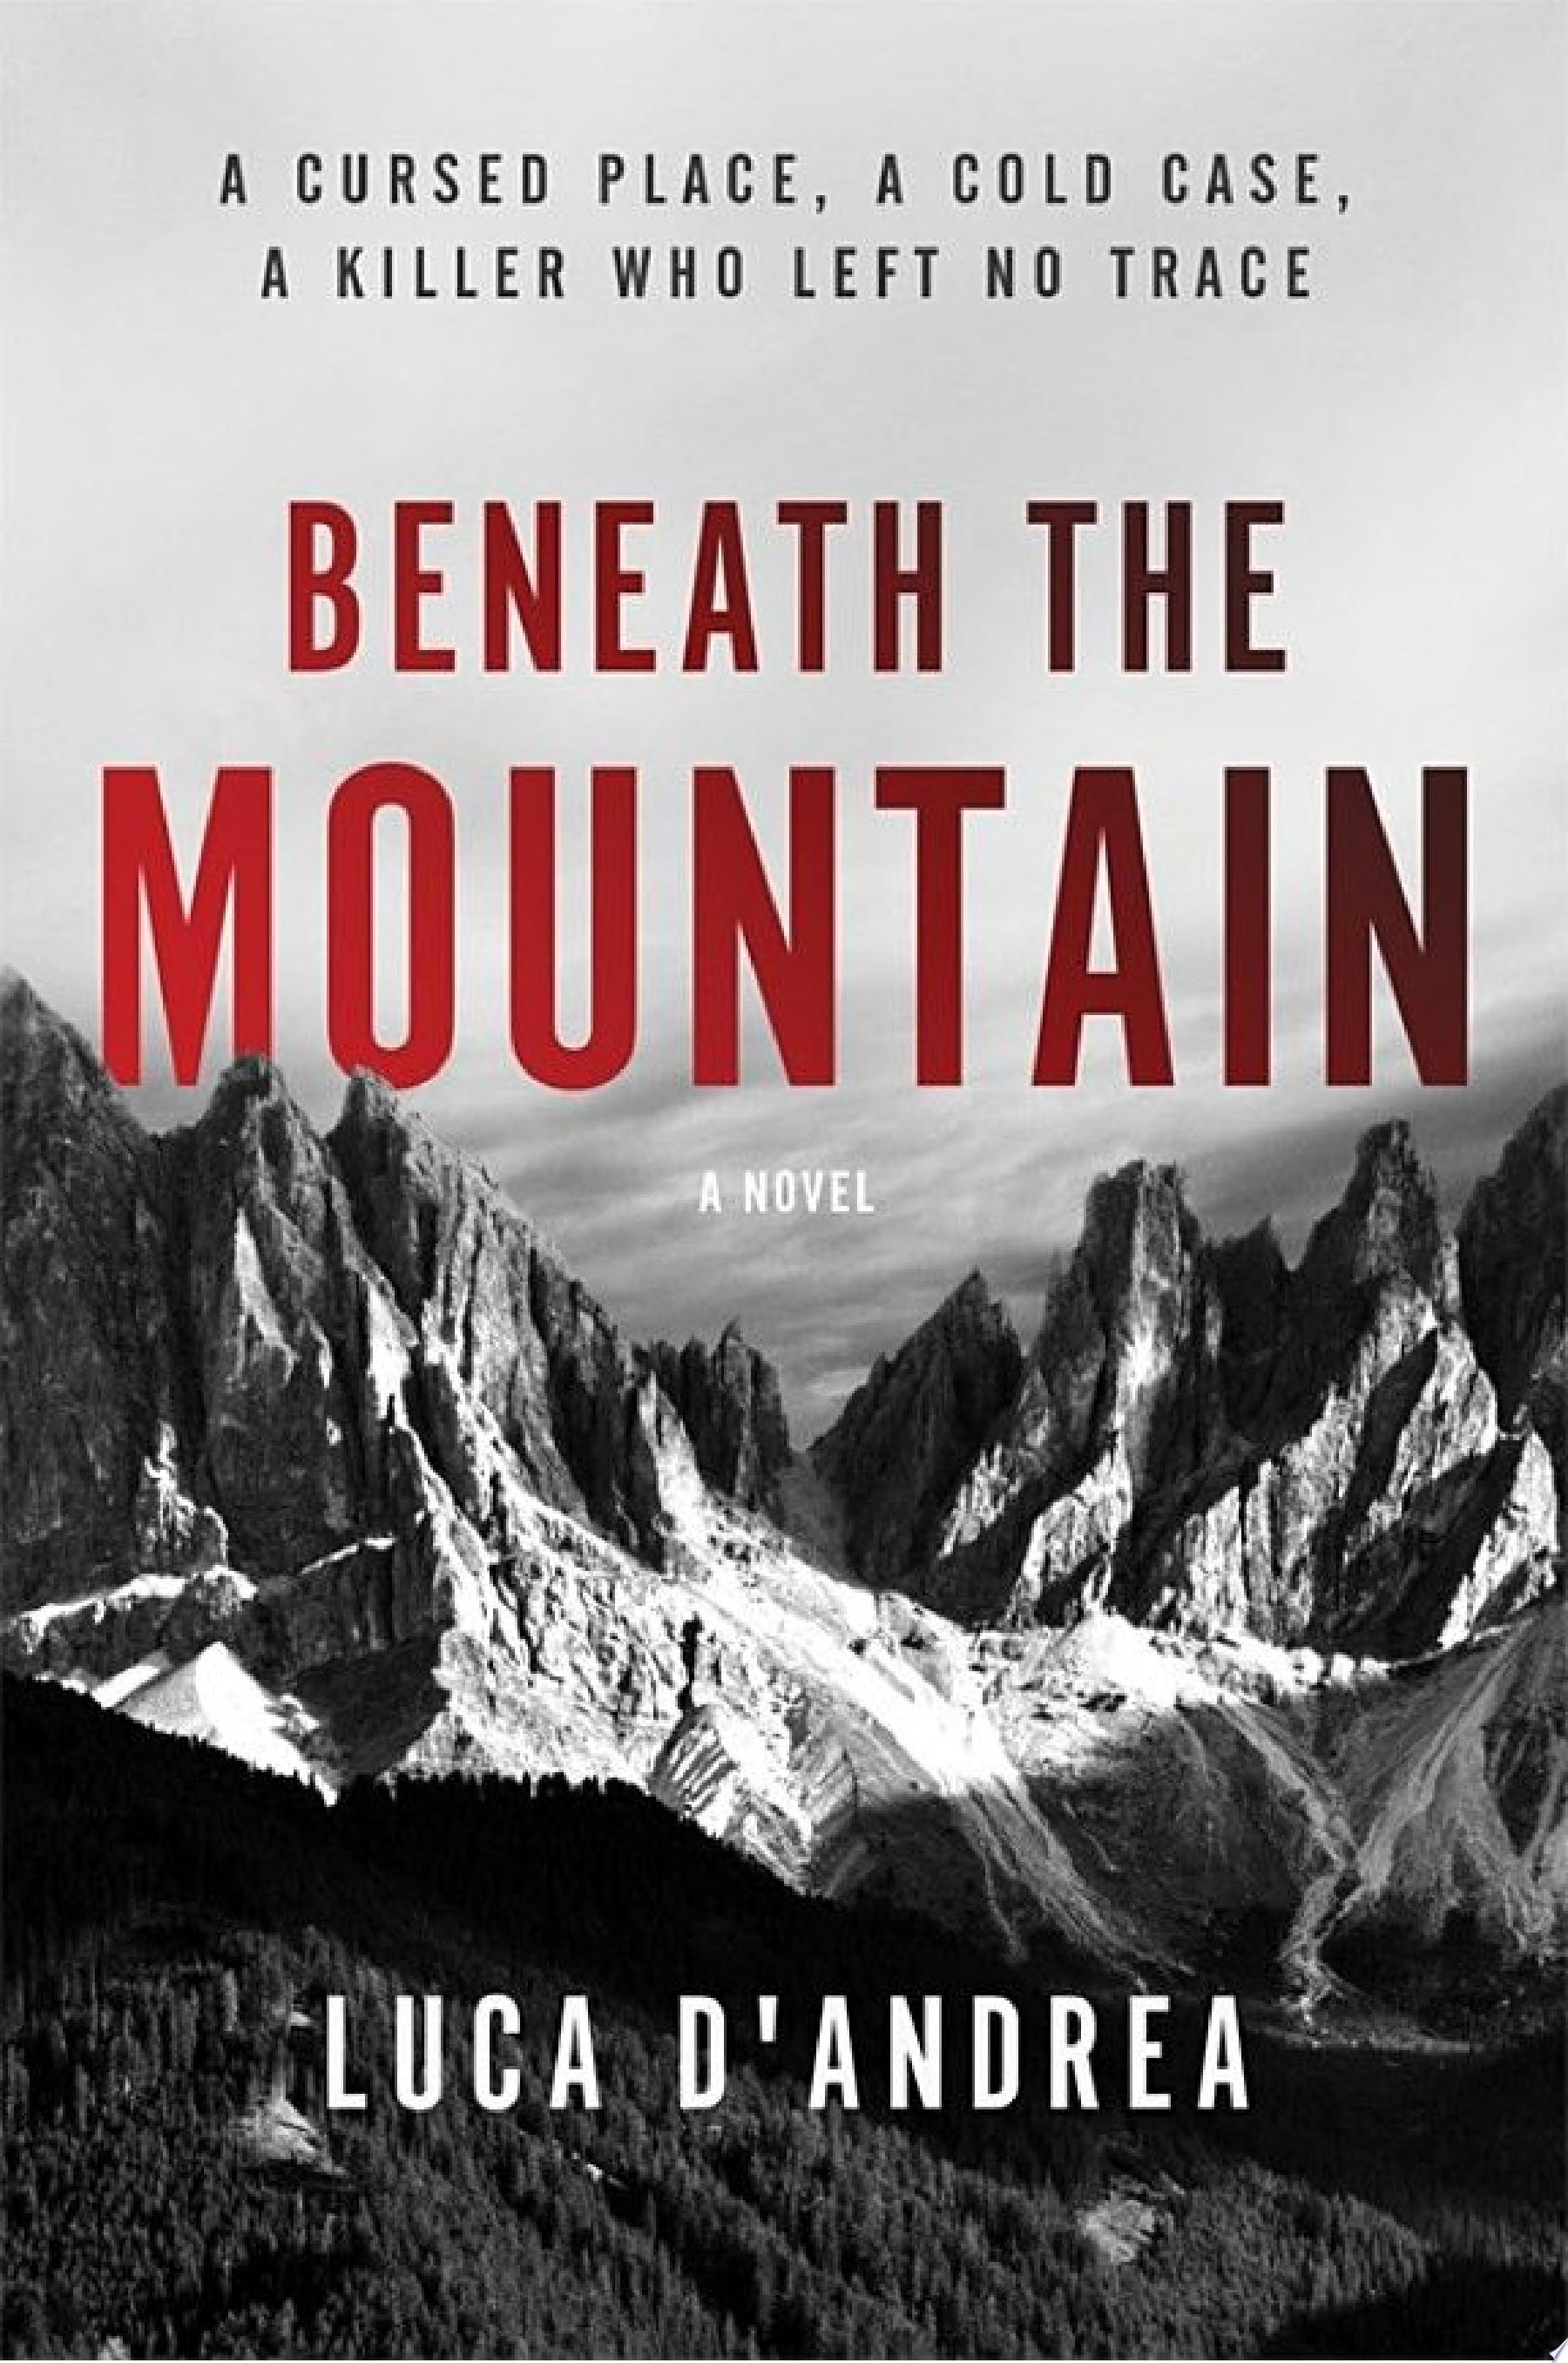 Image for "Beneath the Mountain"